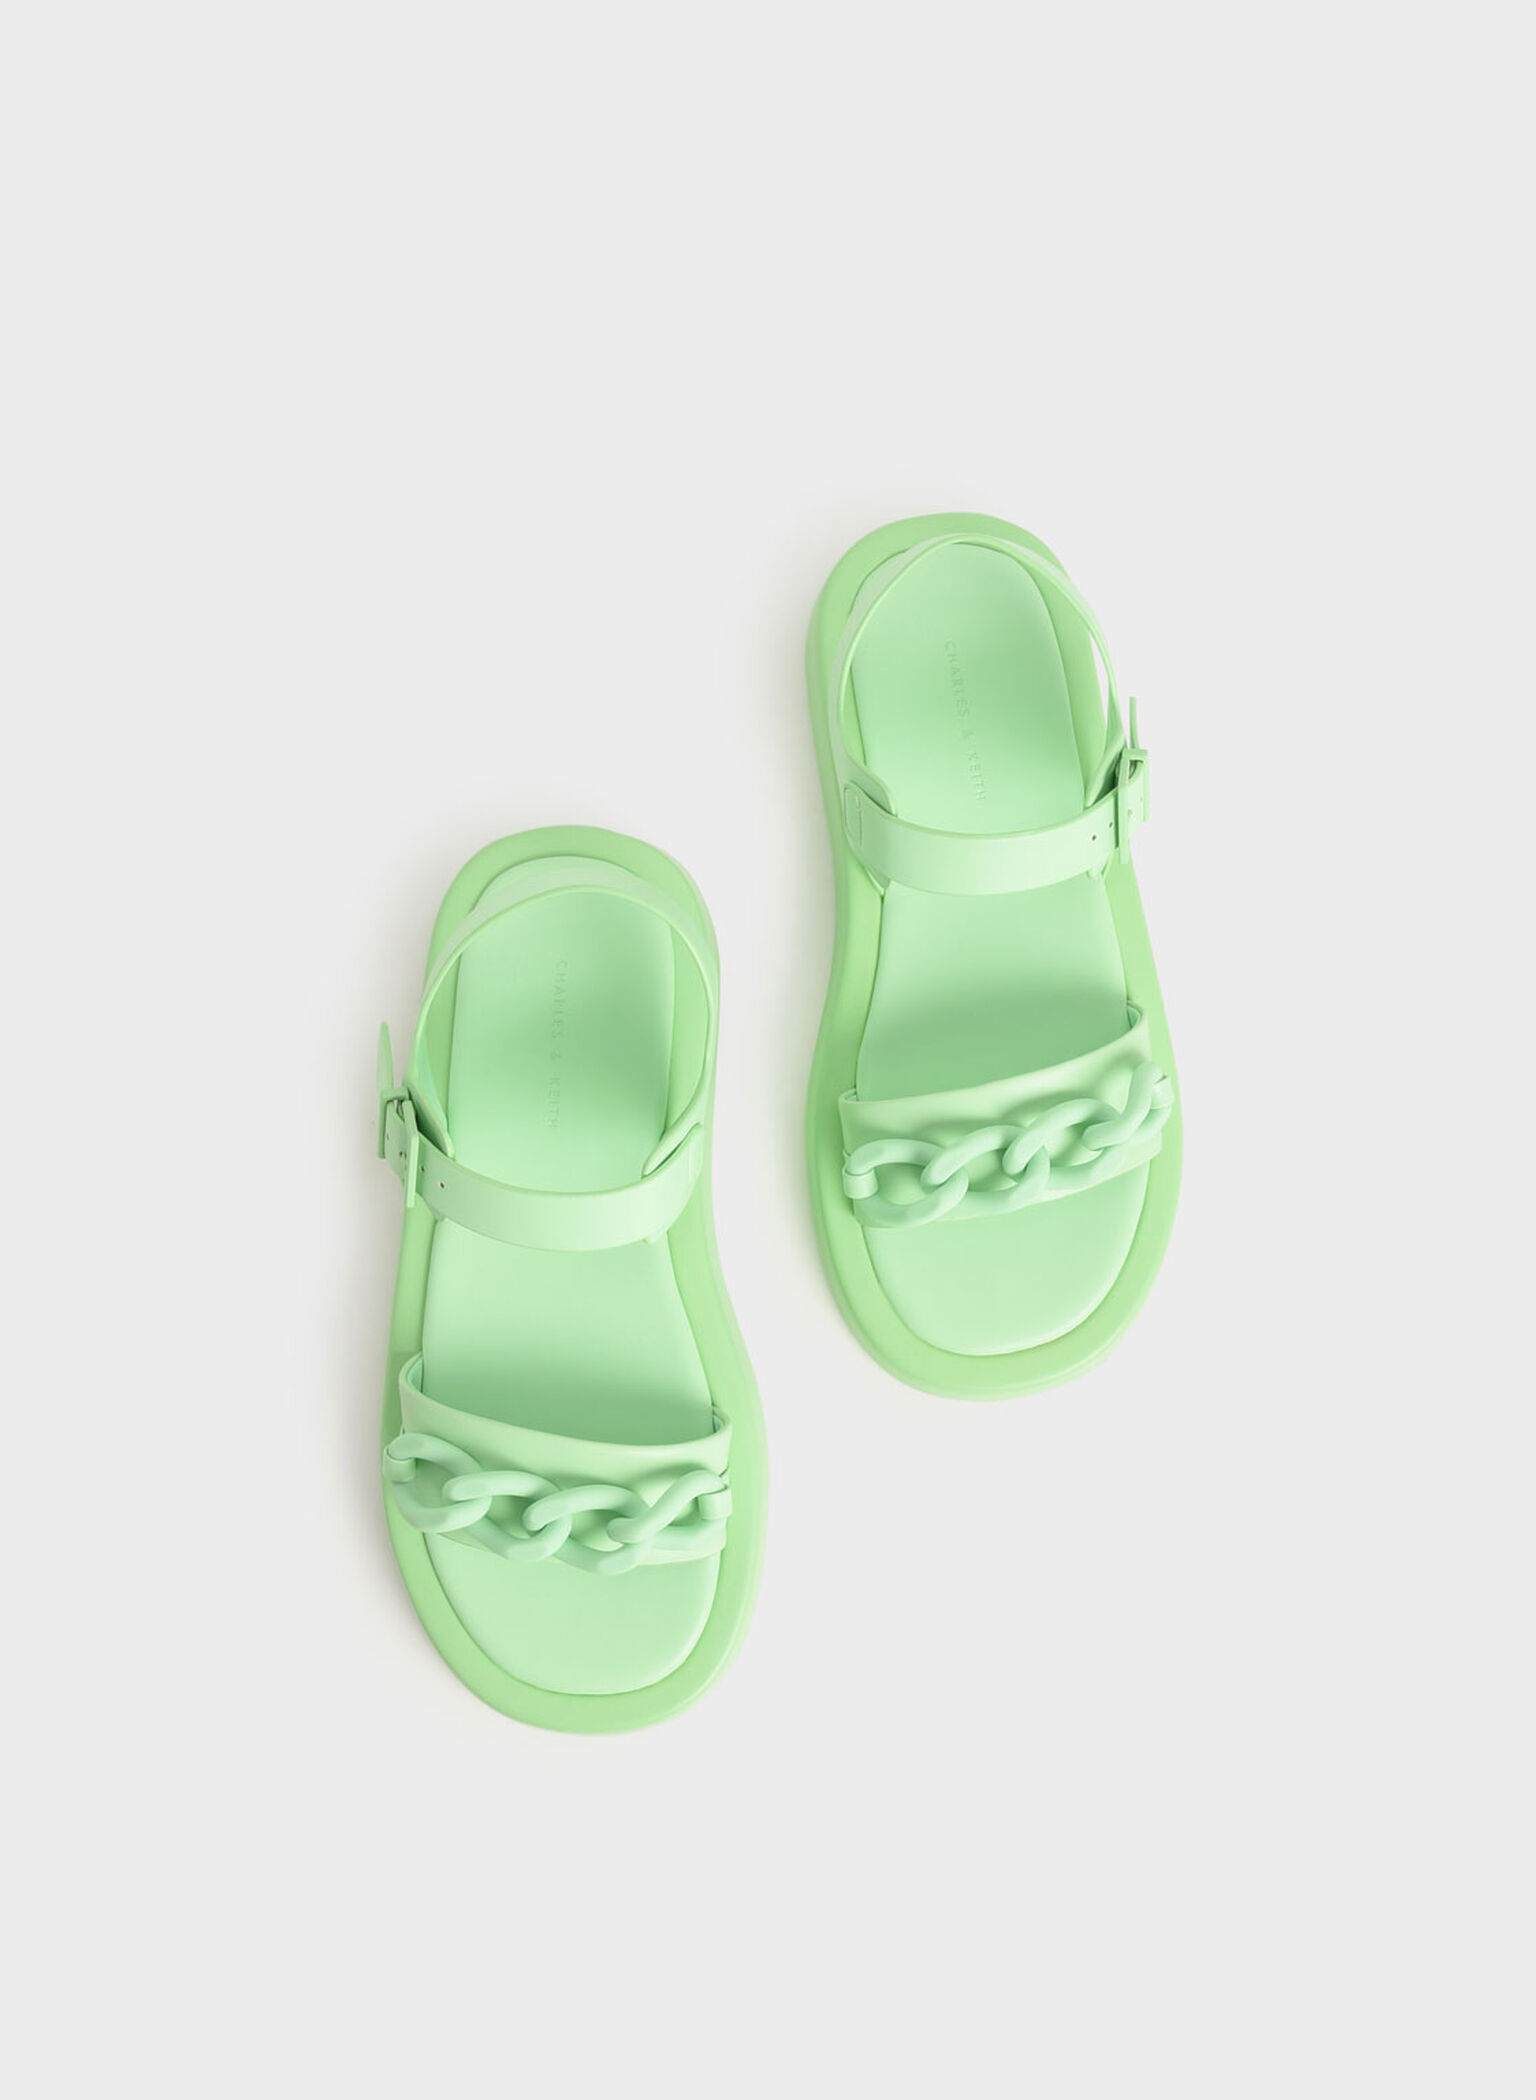 Chunky Chain-Link Ankle-Strap Padded Sandals, Green, hi-res